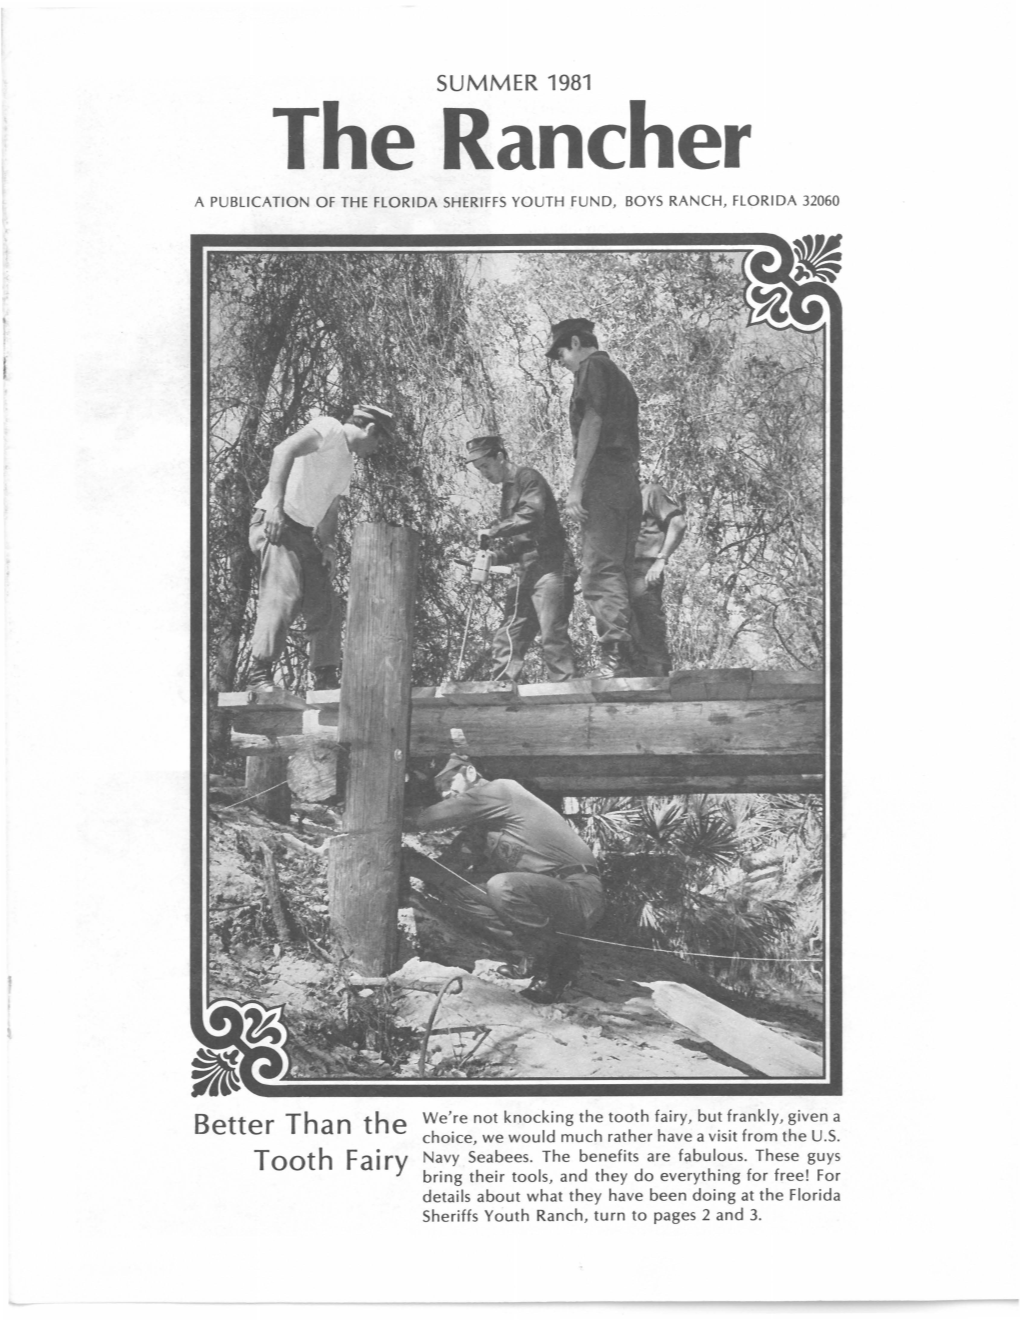 The Rancher a PUBLICATION of the FLORIDA SHERIFFS YOUTH FUND, BOYS RANCH, FLORIDA 32060